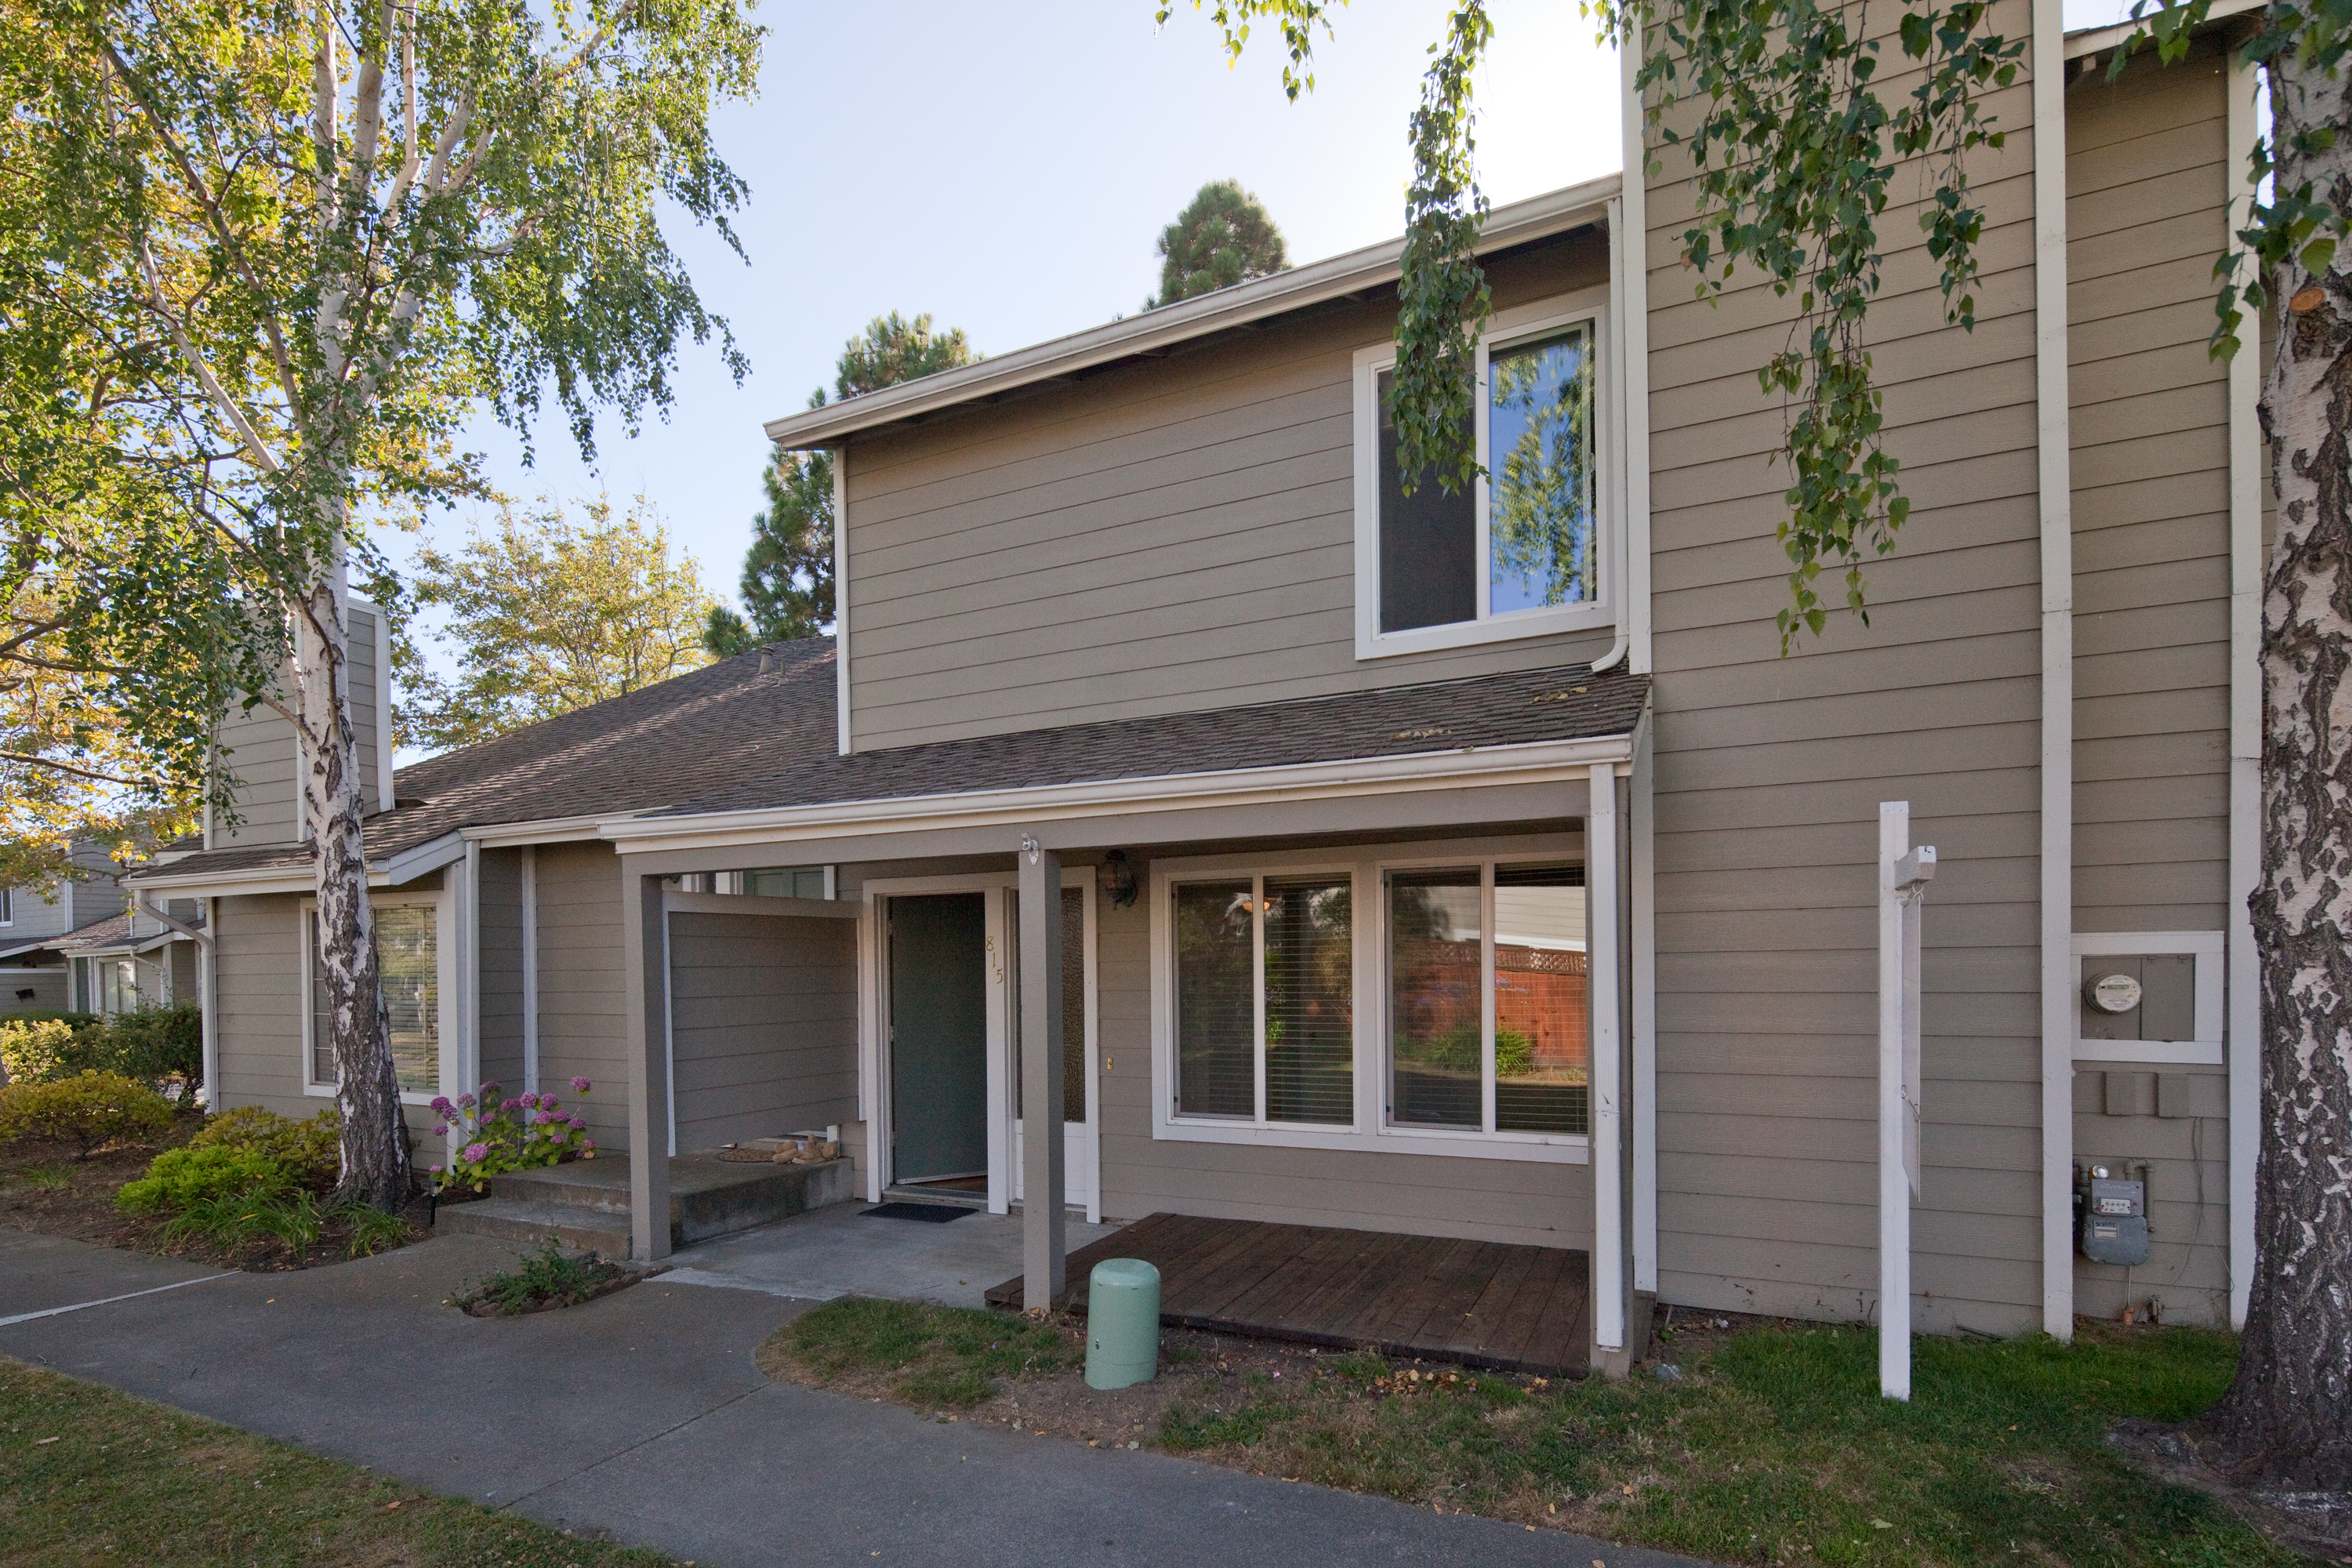 815 Peary Ln, Foster City 94404 - Peary Ln 815 